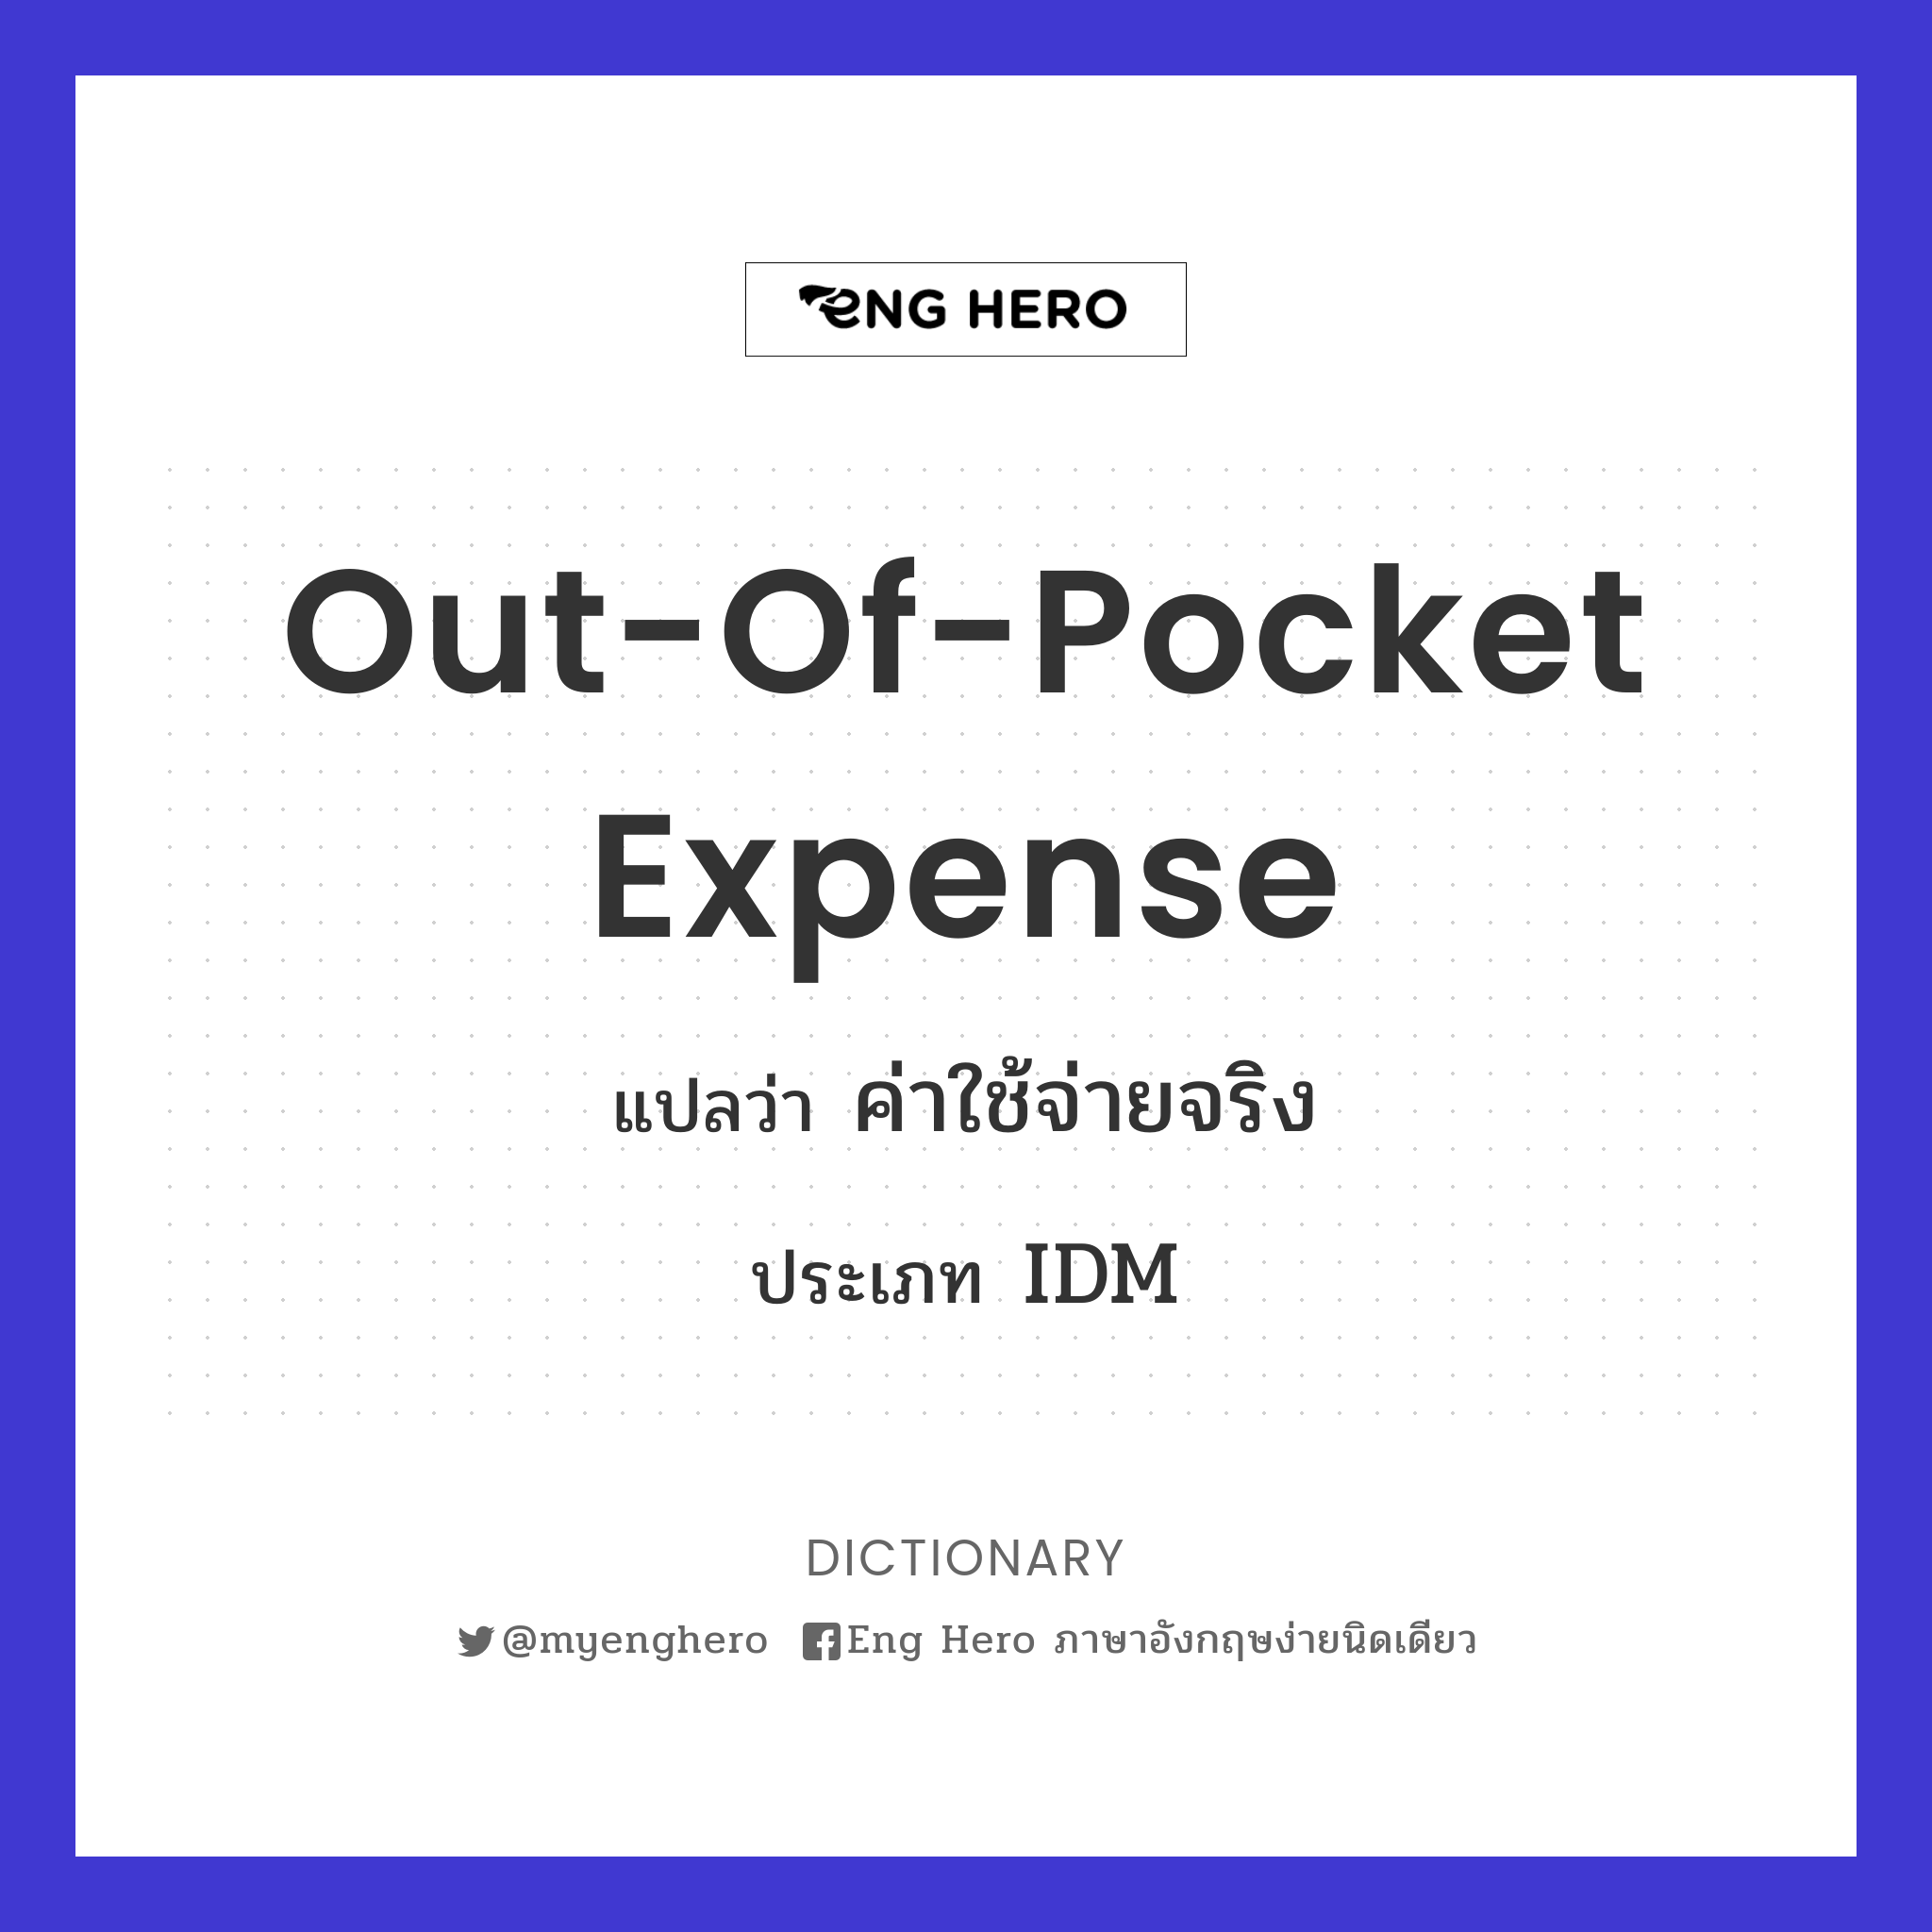 out-of-pocket expense